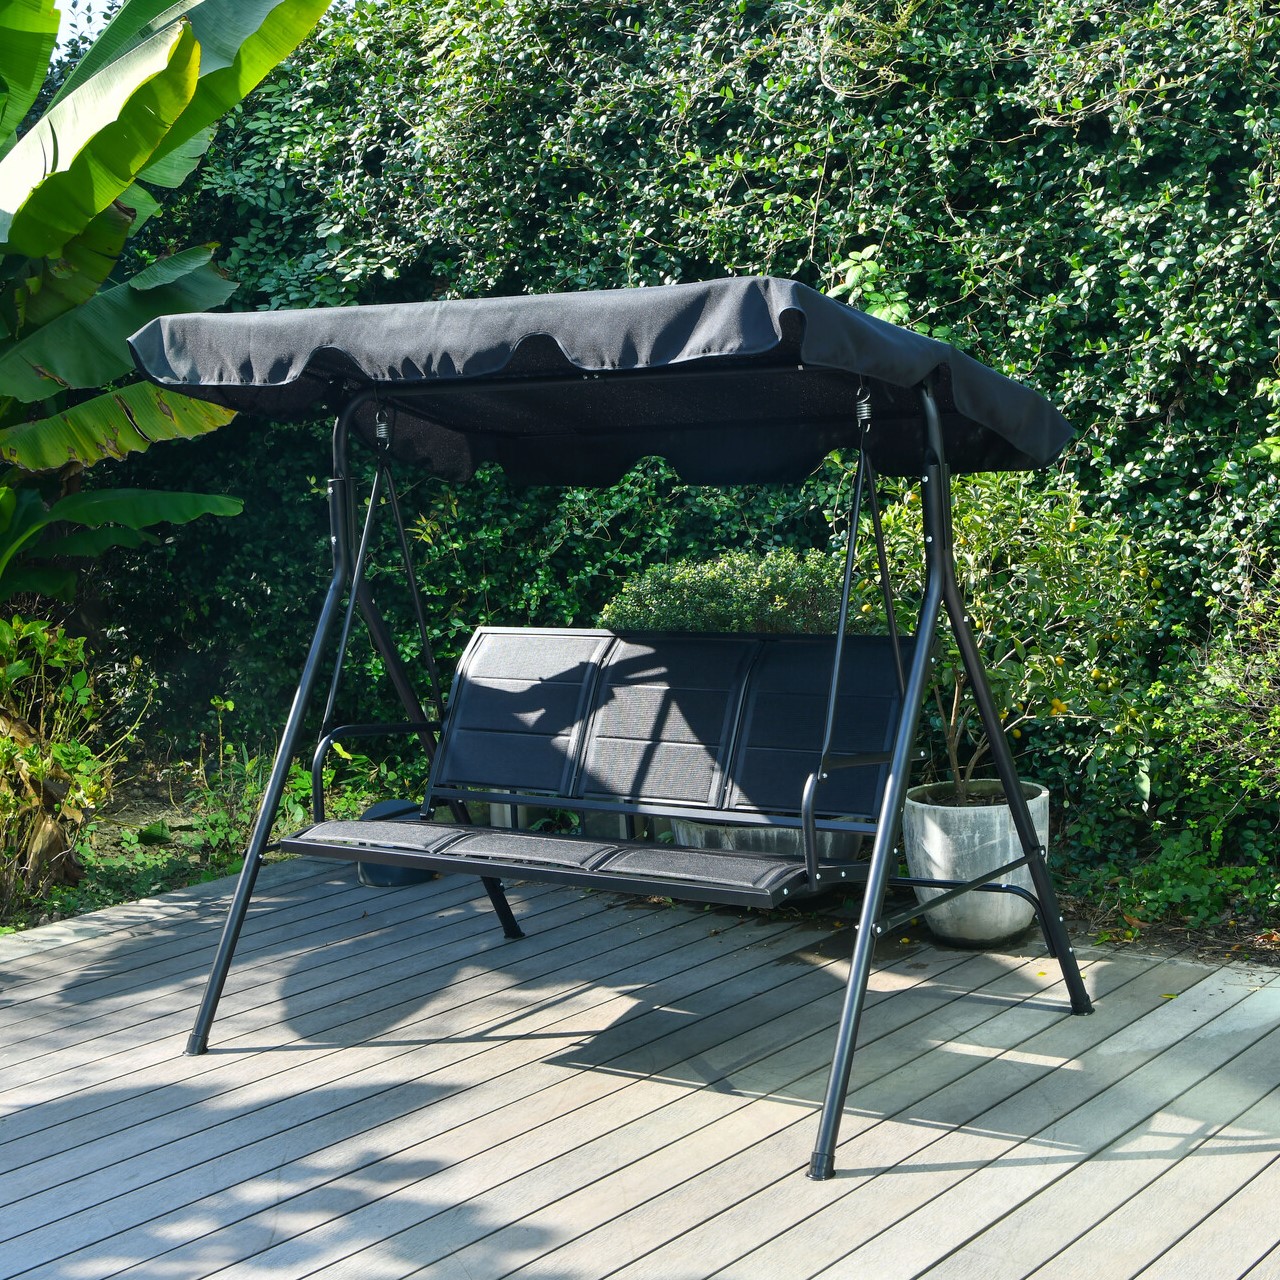 Outdoor Essentials Palma Air Tex 3 Seater Black Swing Chair Image